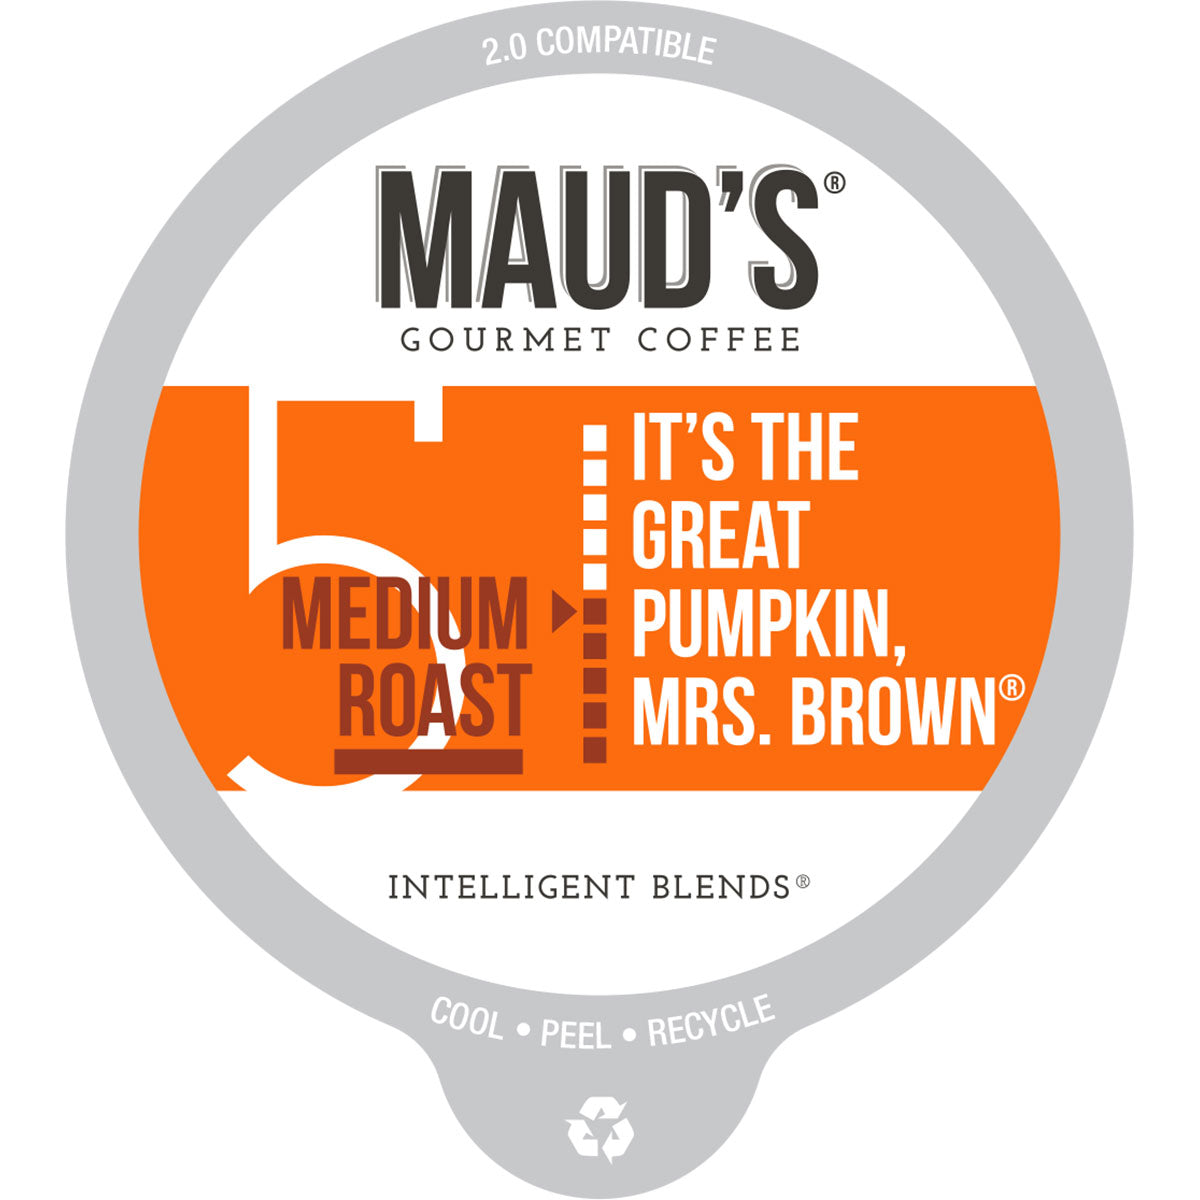 Maud's Pumpkin Spice Flavored Coffee Pods  (It's The Great Pumpkin, Mrs. Brown) - 50ct